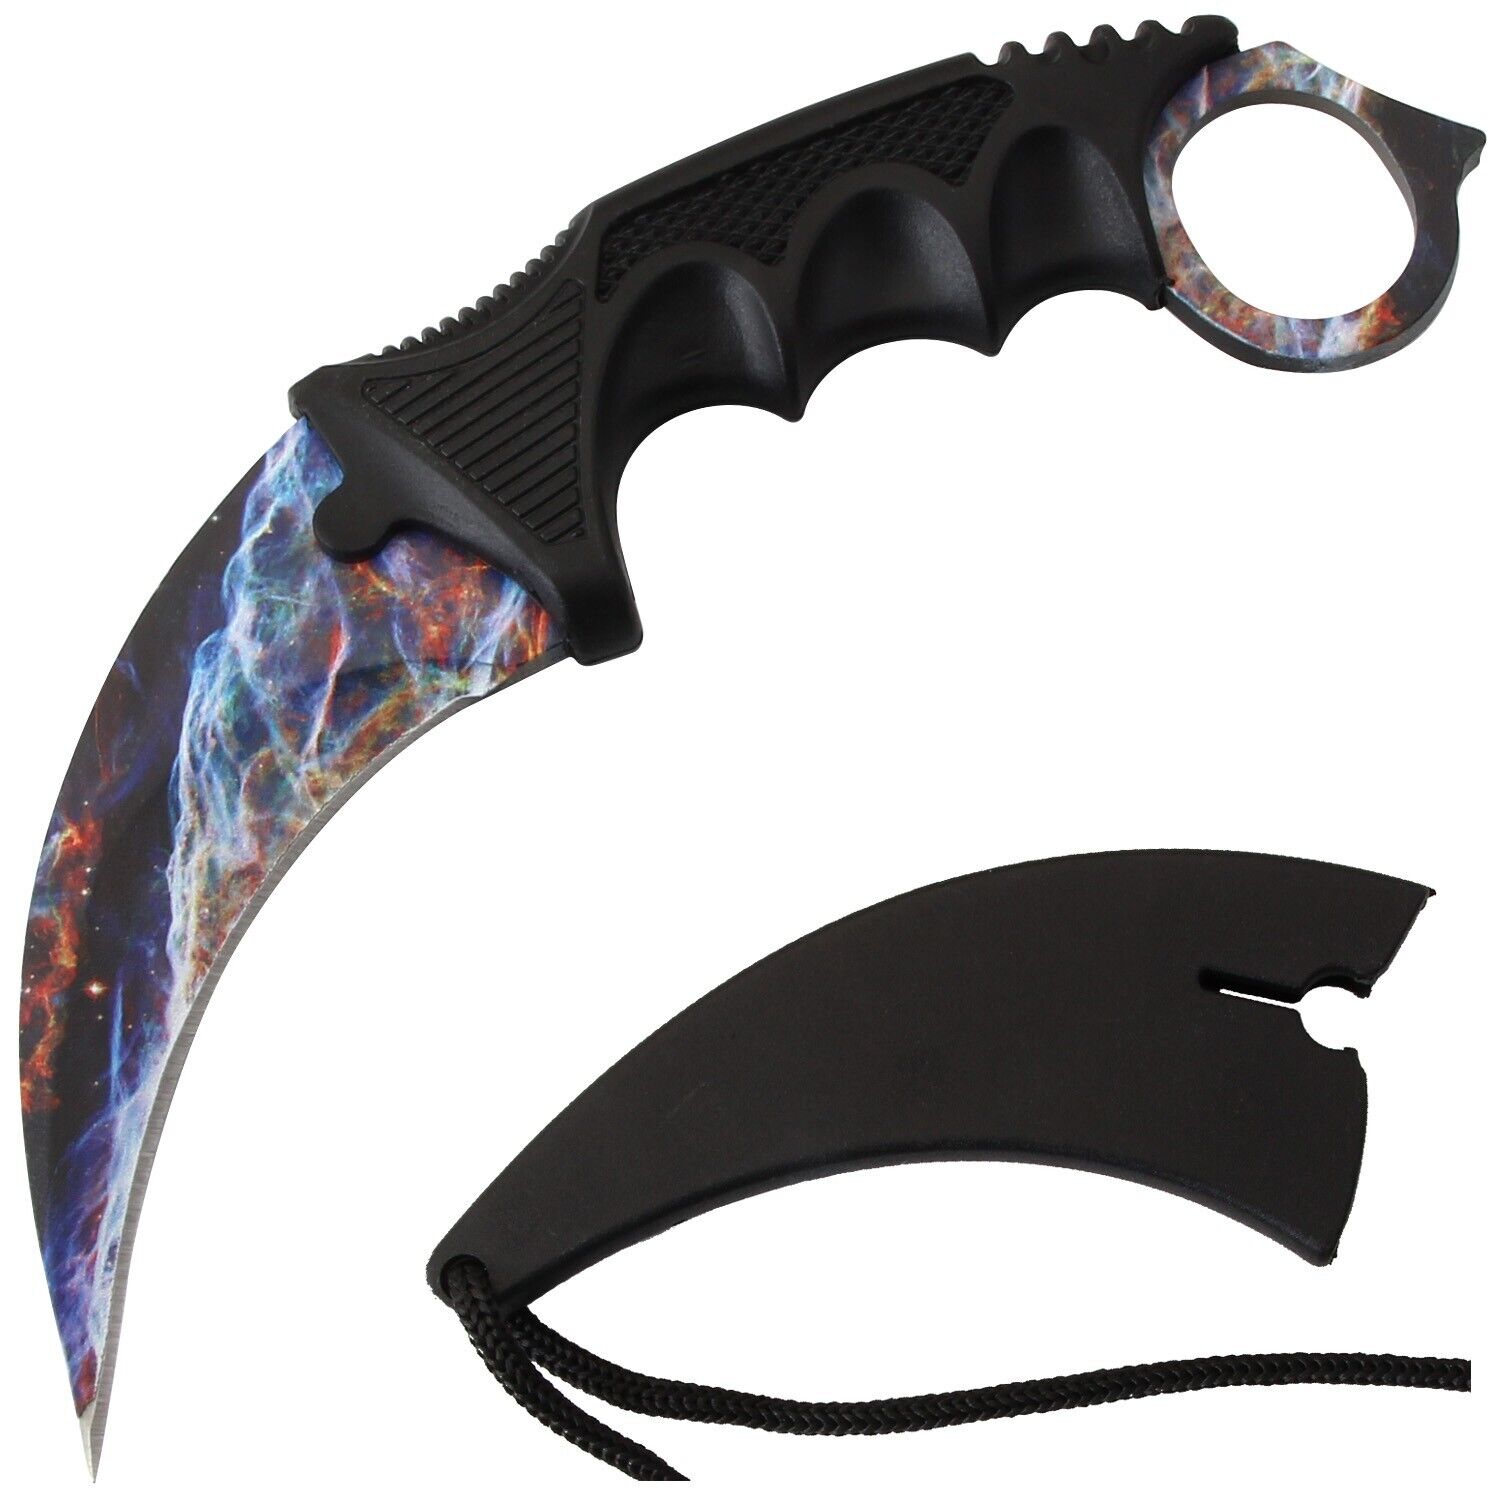 7.5 CSGO KARAMBIT Tactical Knife Stainless Steel Fixed Blade